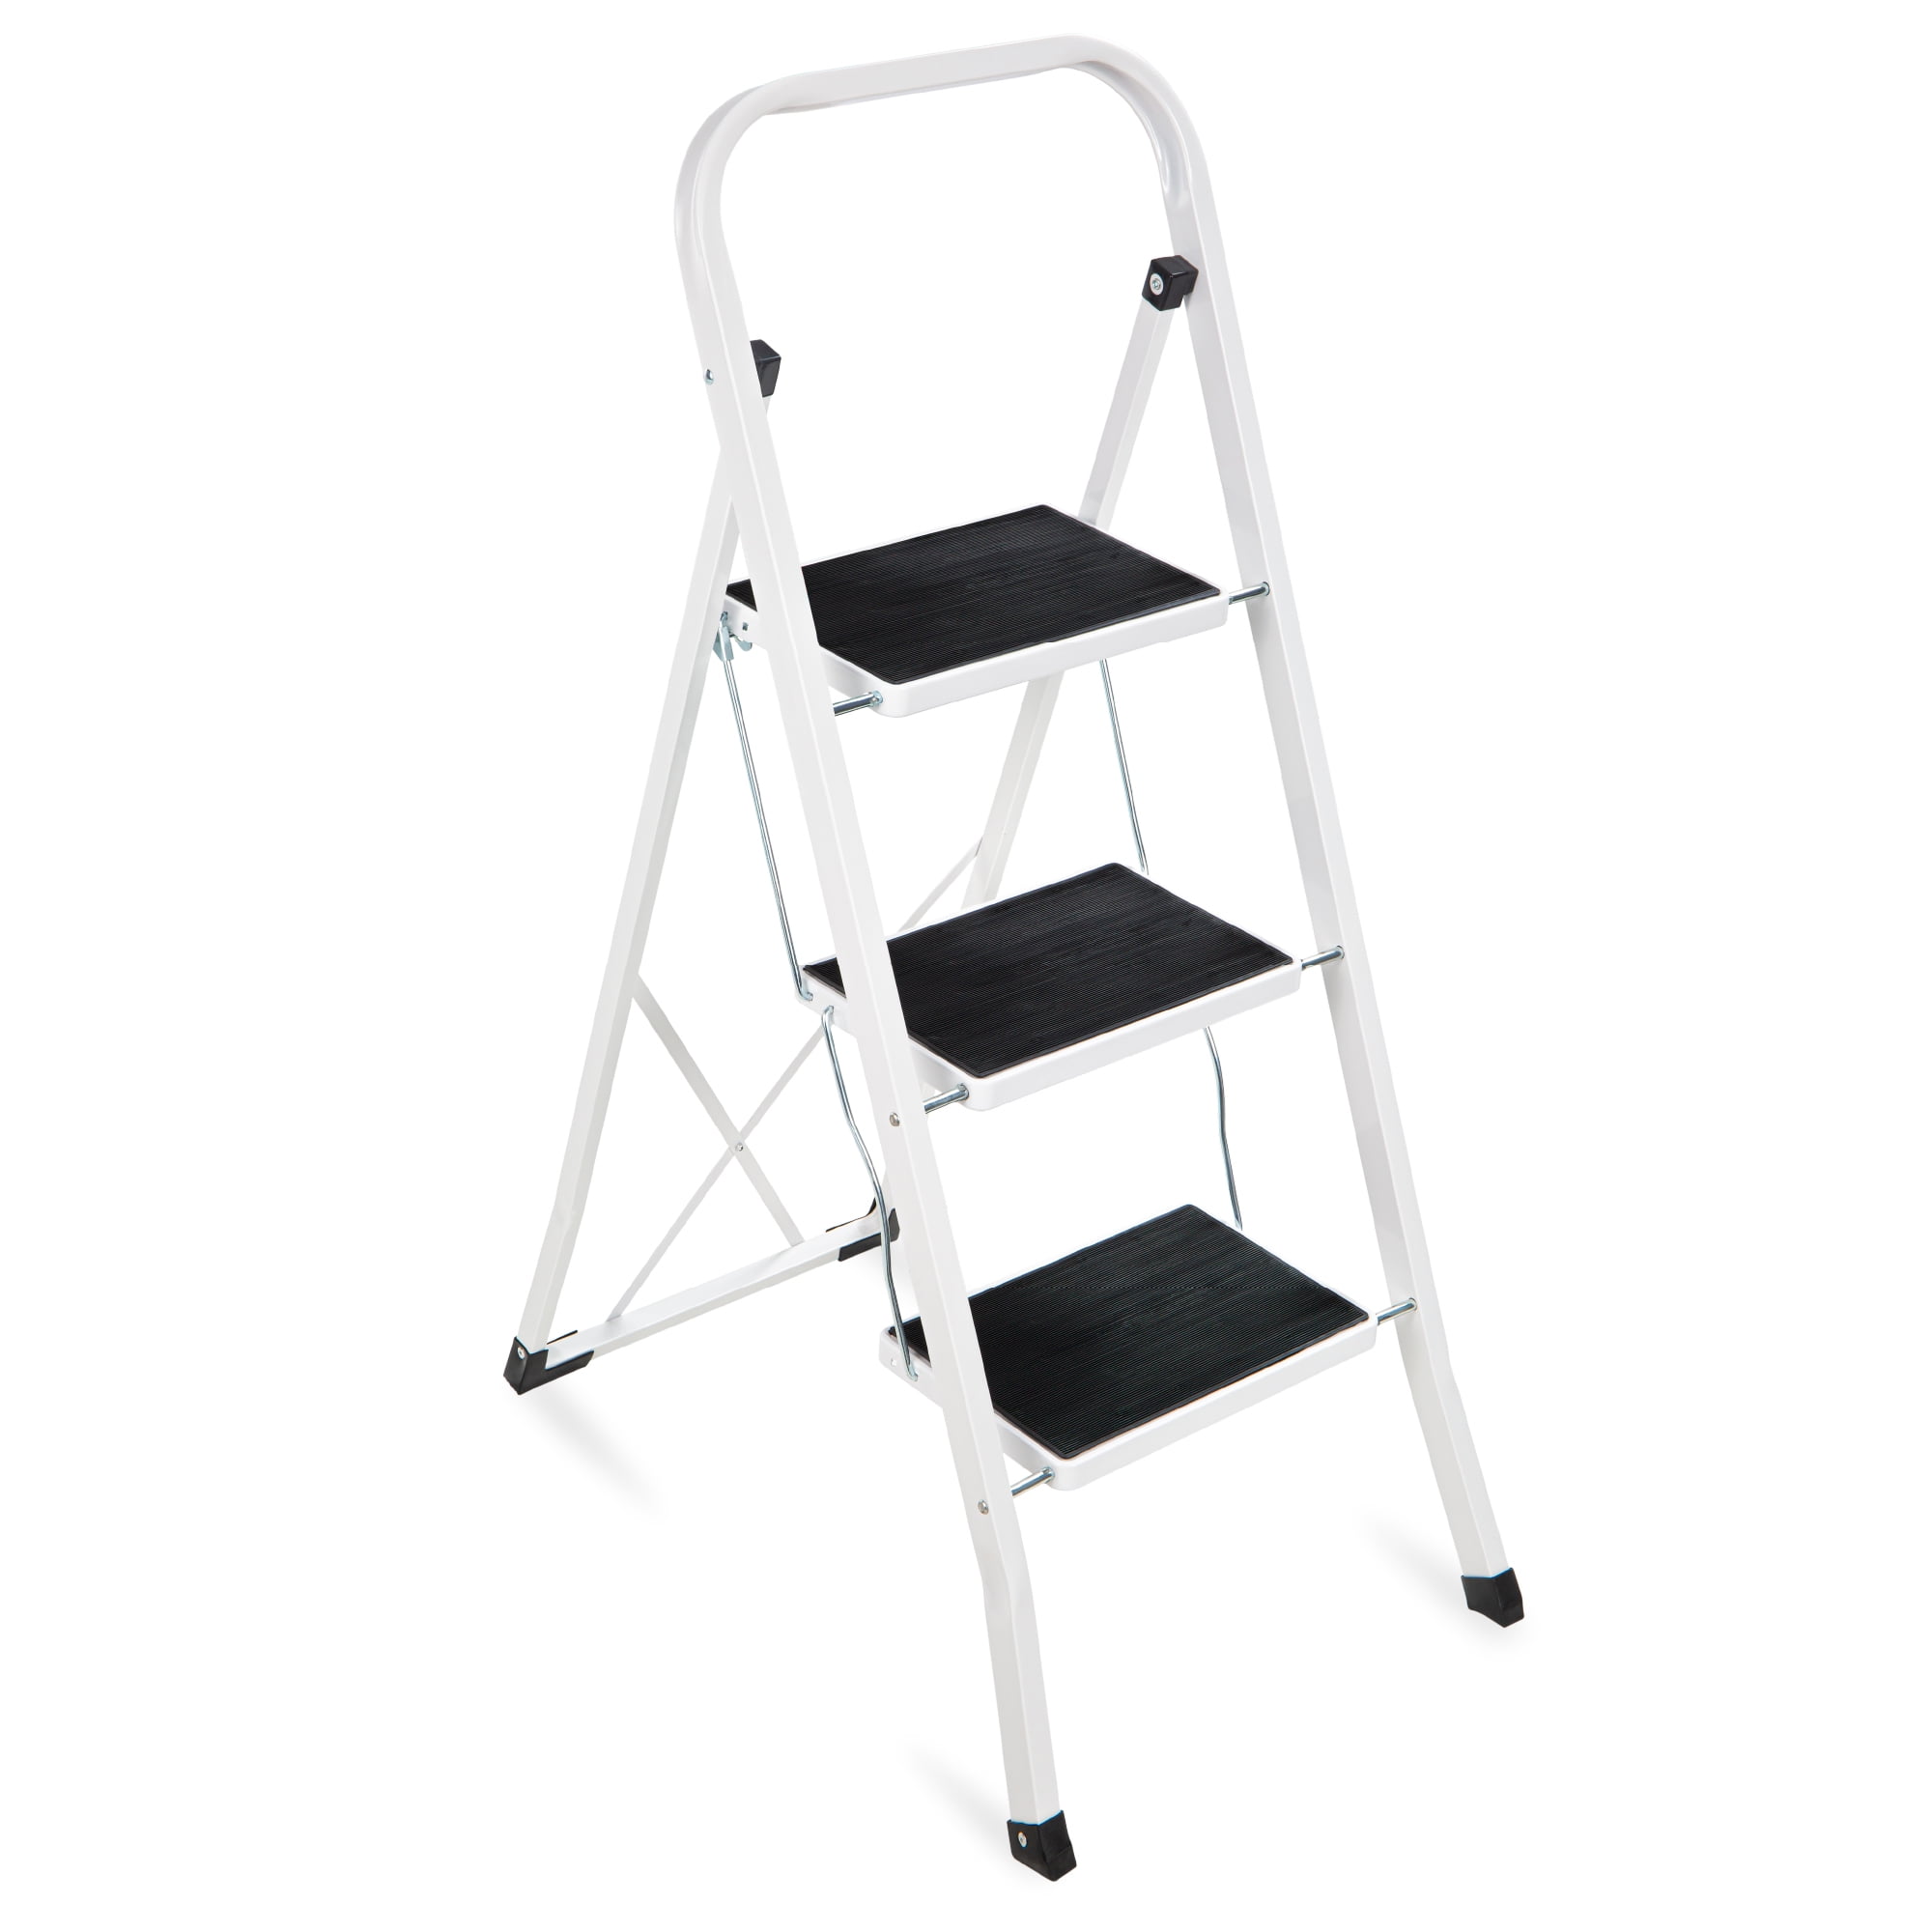 GYMAX 4 Step Ladder with Non-Slip Treads and Tool Tray 150kg Capacity Folding Aluminium Stepladder for Home Kitchen Garage Portable Heavy Duty Safety Ladders